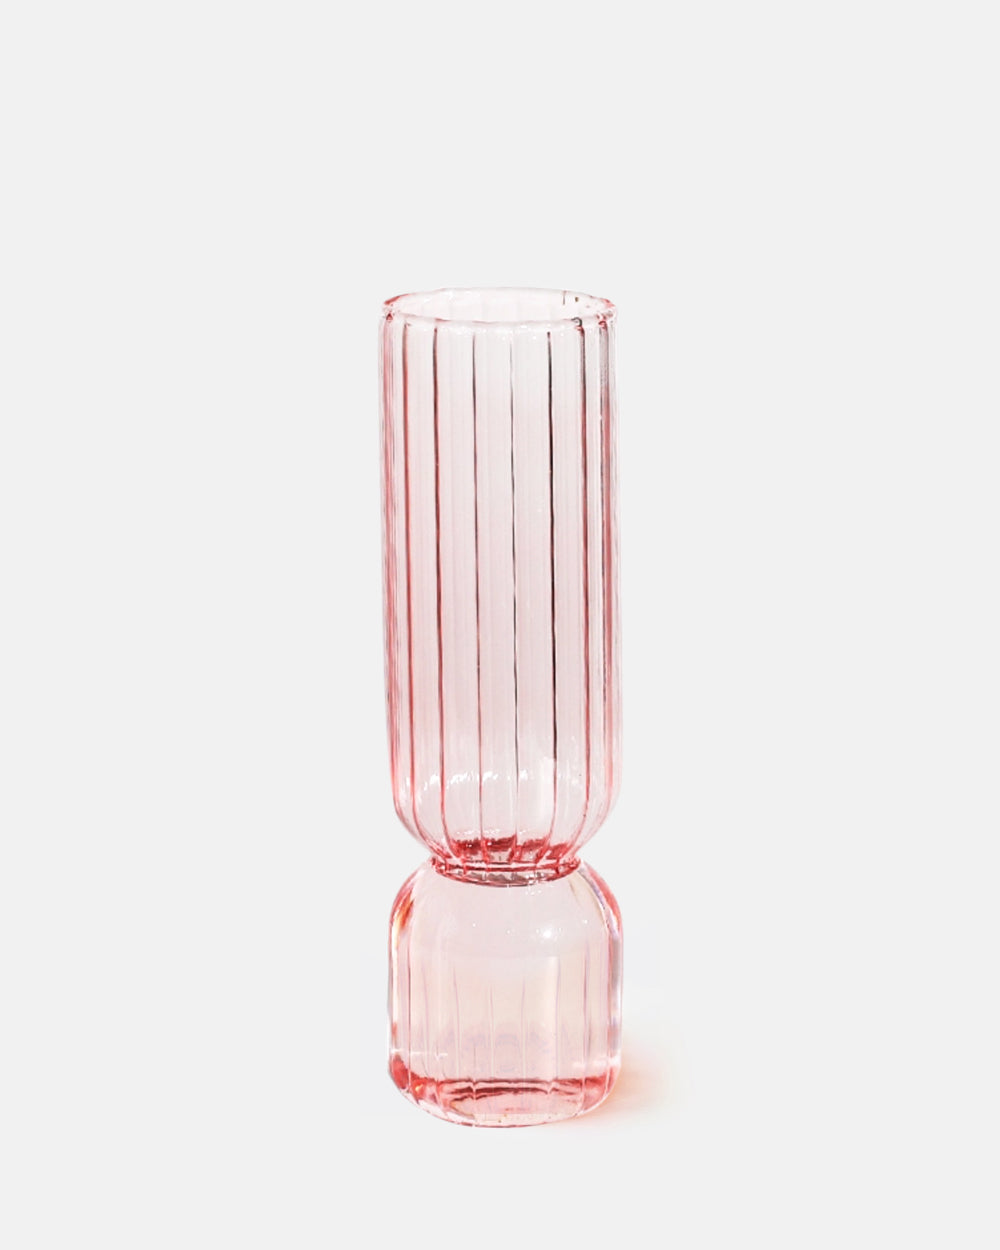 TWO TIER VASE IN PINK